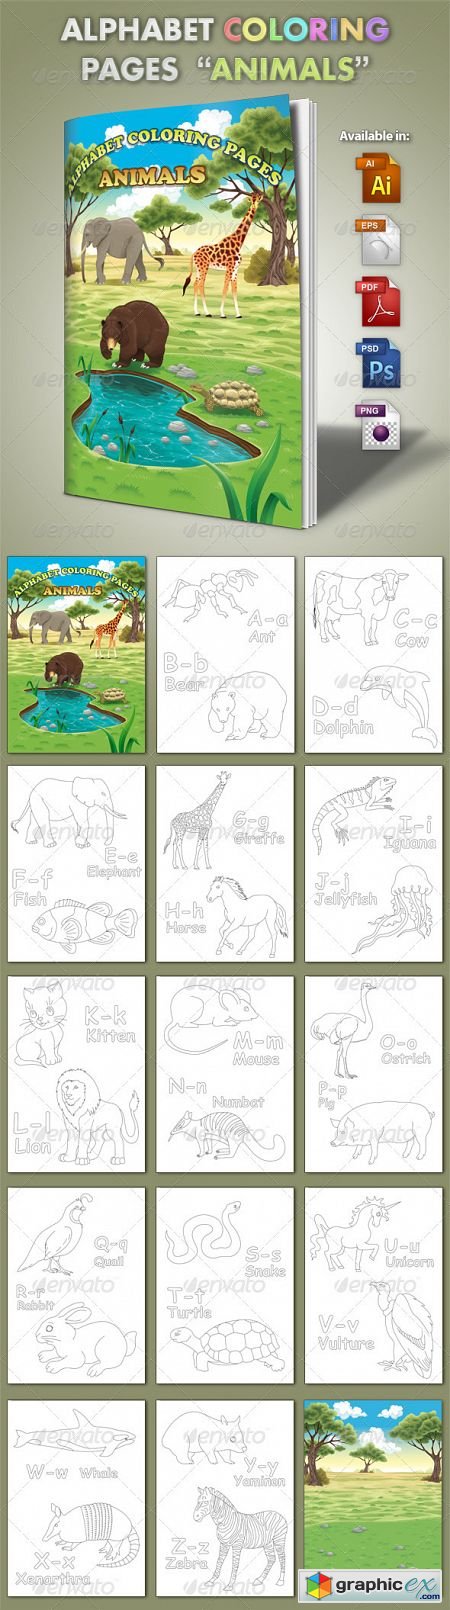 Alphabet Coloring Pages - Animals 3652675